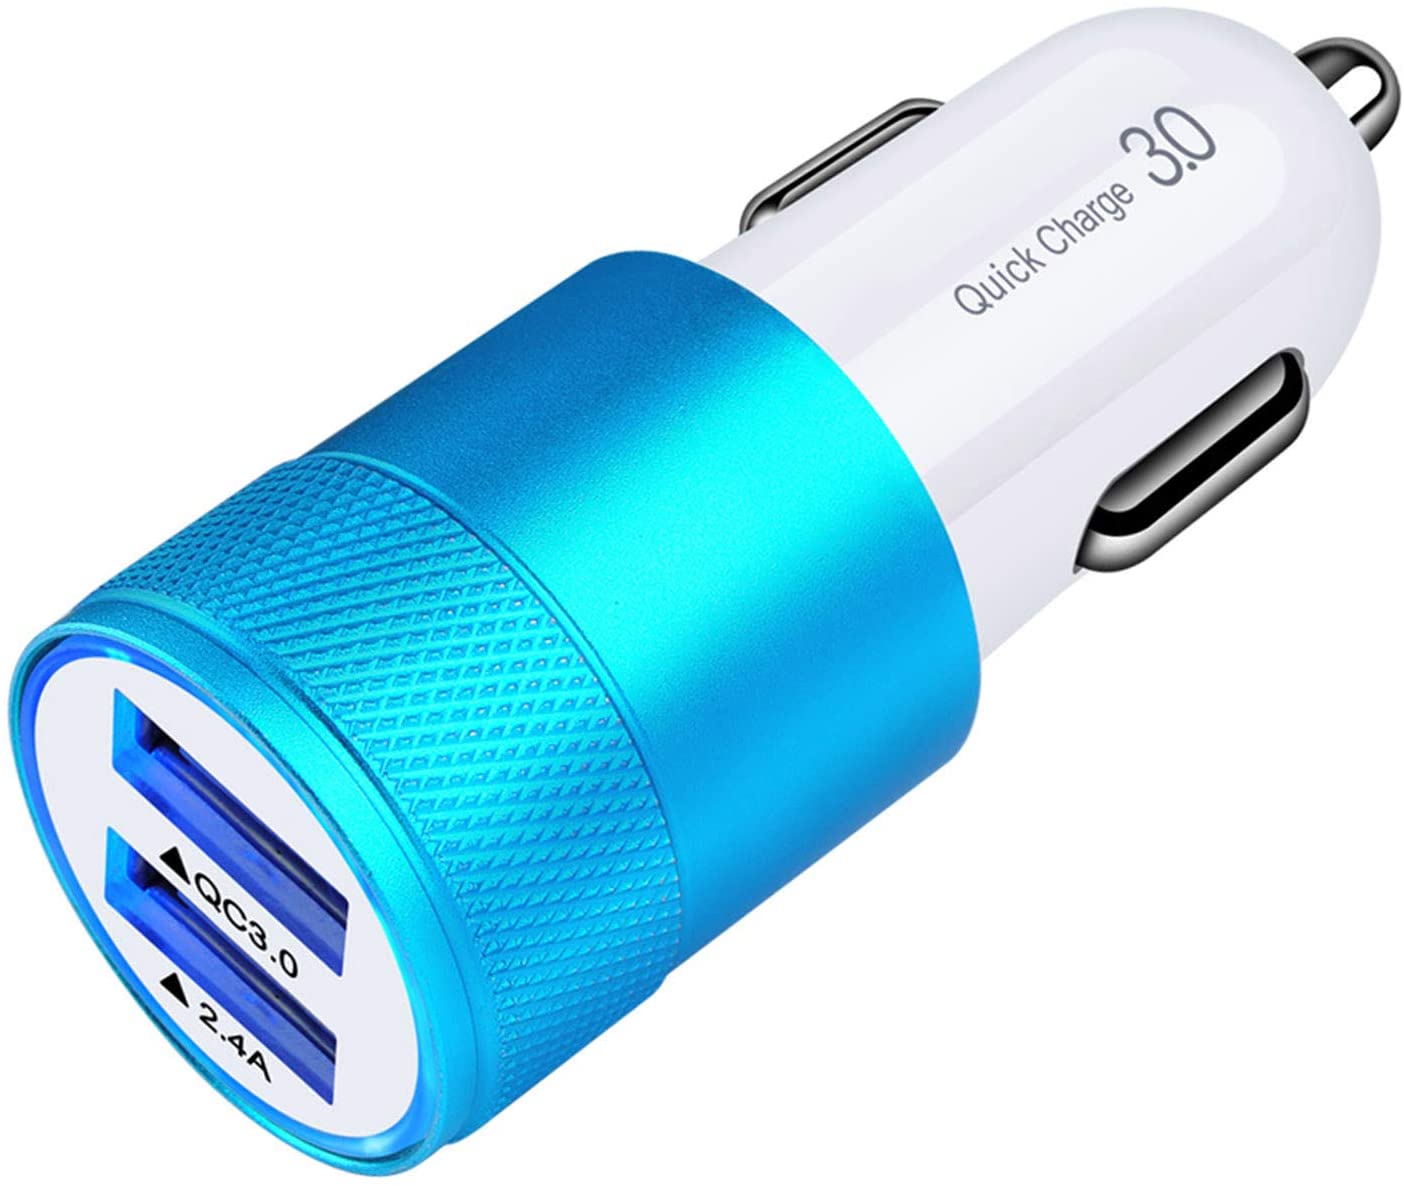 Fast Car Charger, 5.4A/30W Phone USB Car Charger Adapter Rapid Plug 2 Port Cigarette Lighter Charger